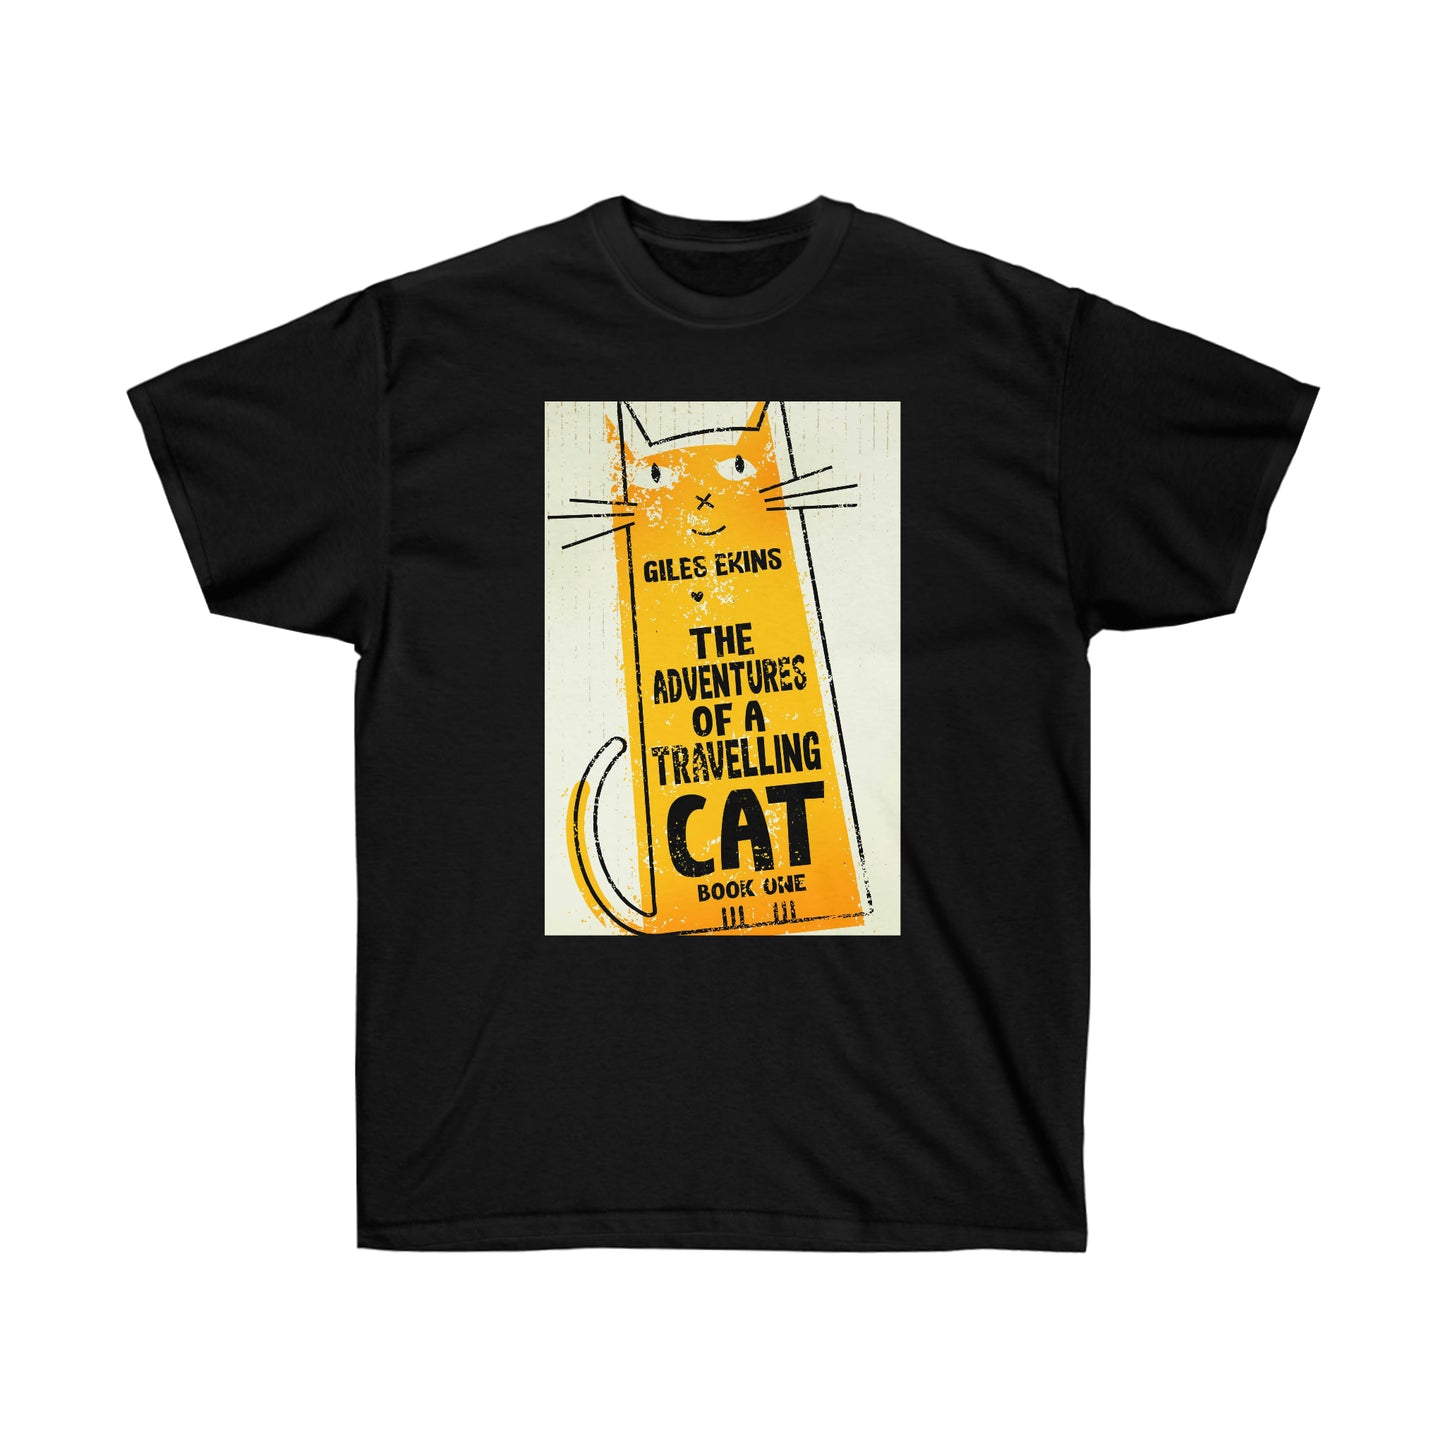 The Adventures Of A Travelling Cat - Unisex T-Shirt